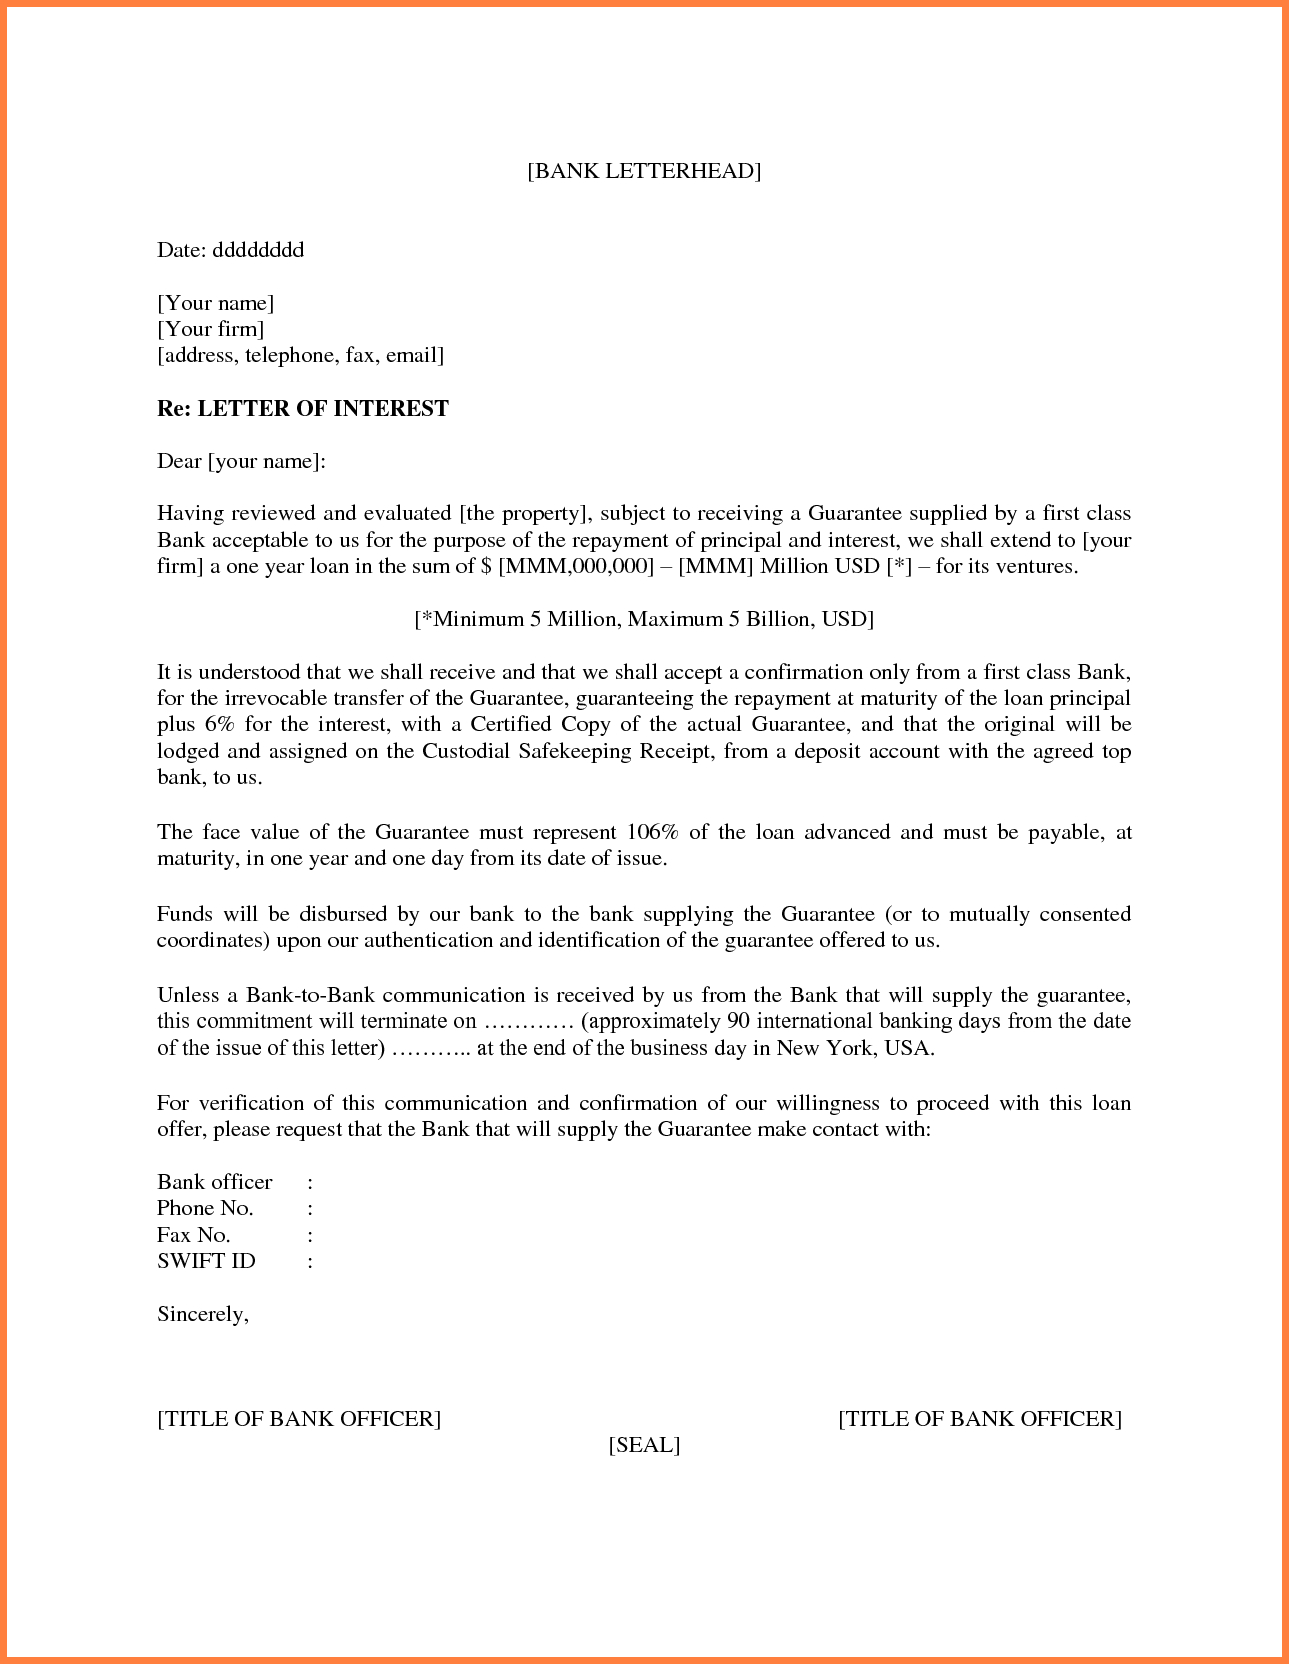 011 Letter Of Interest Template Microsoft Word Sweep11 Ideas Intended For Letter Of Interest Template Microsoft Word